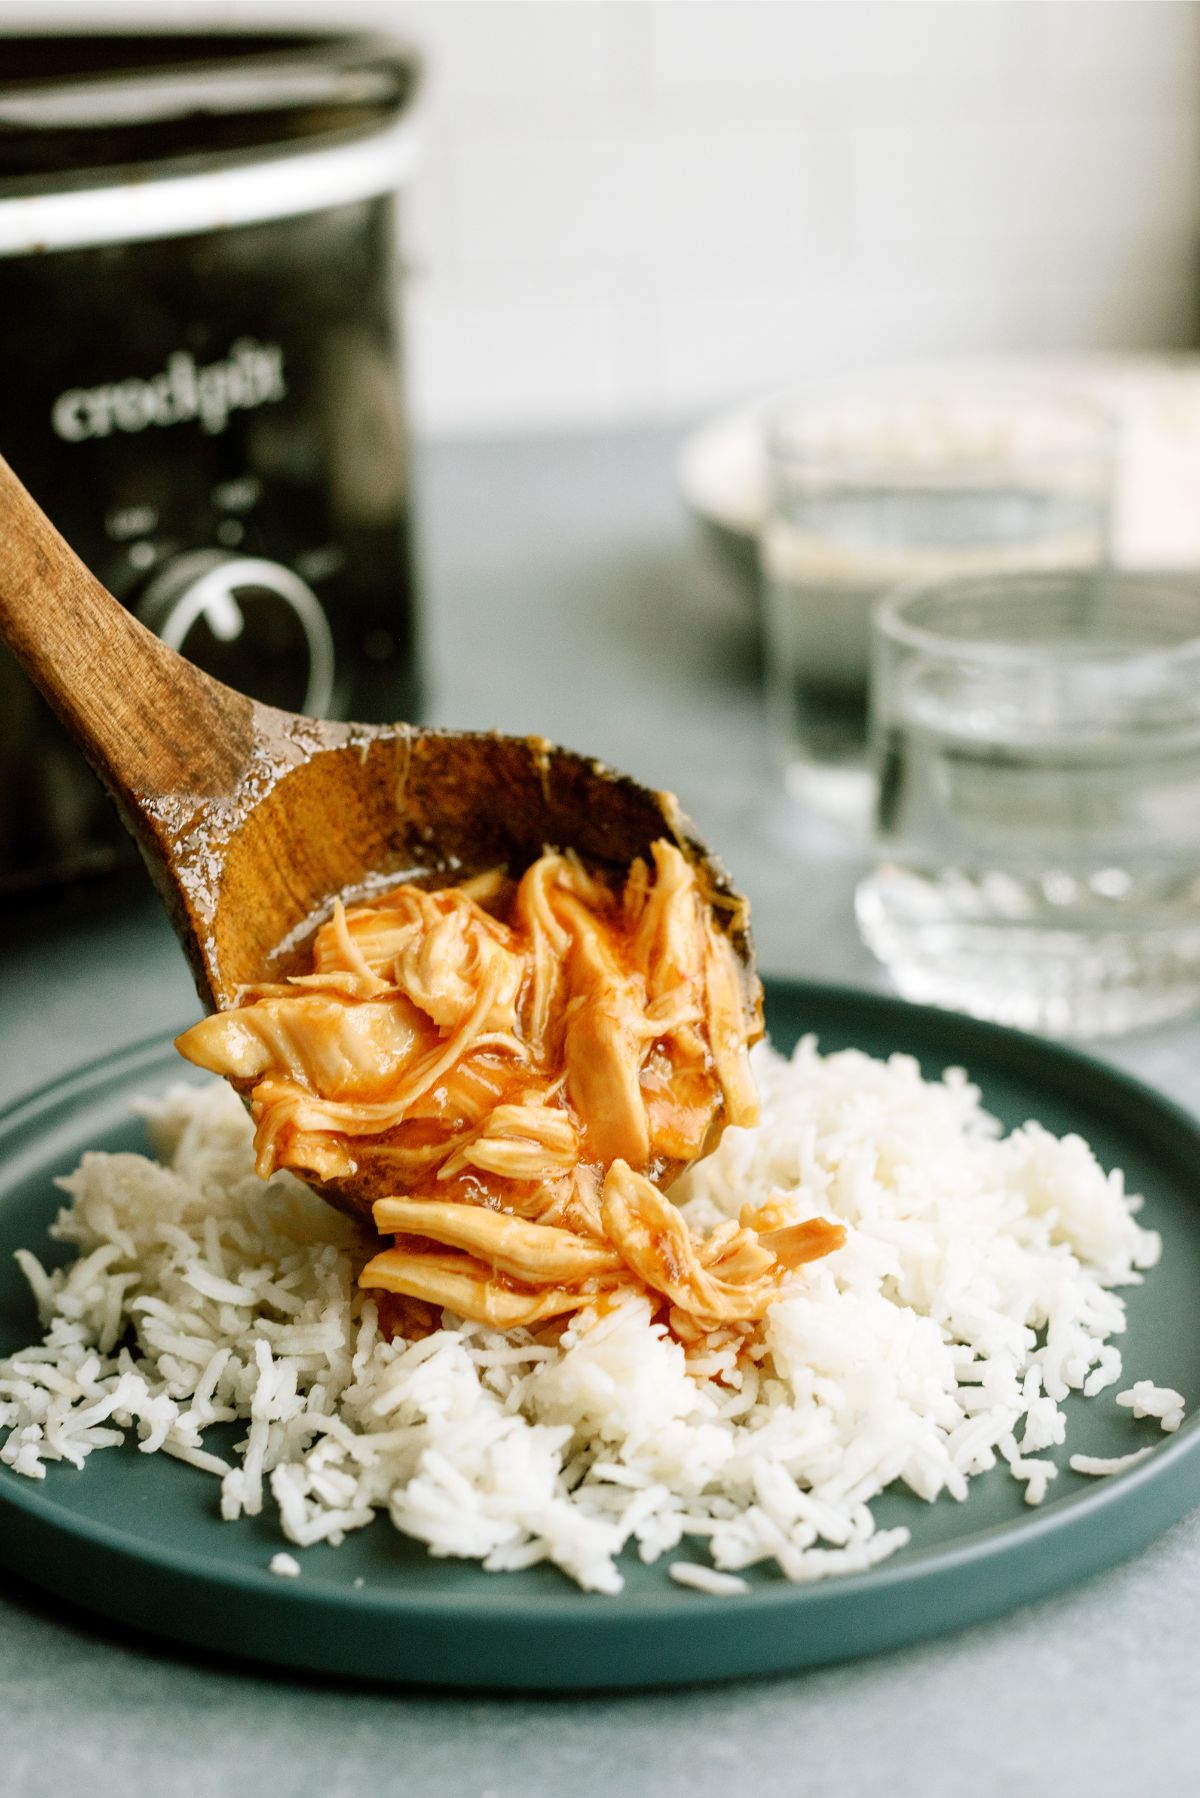 A scoop of Slow Cooker Apricot Chicken from the slow cooker placed on top of a plate of rice